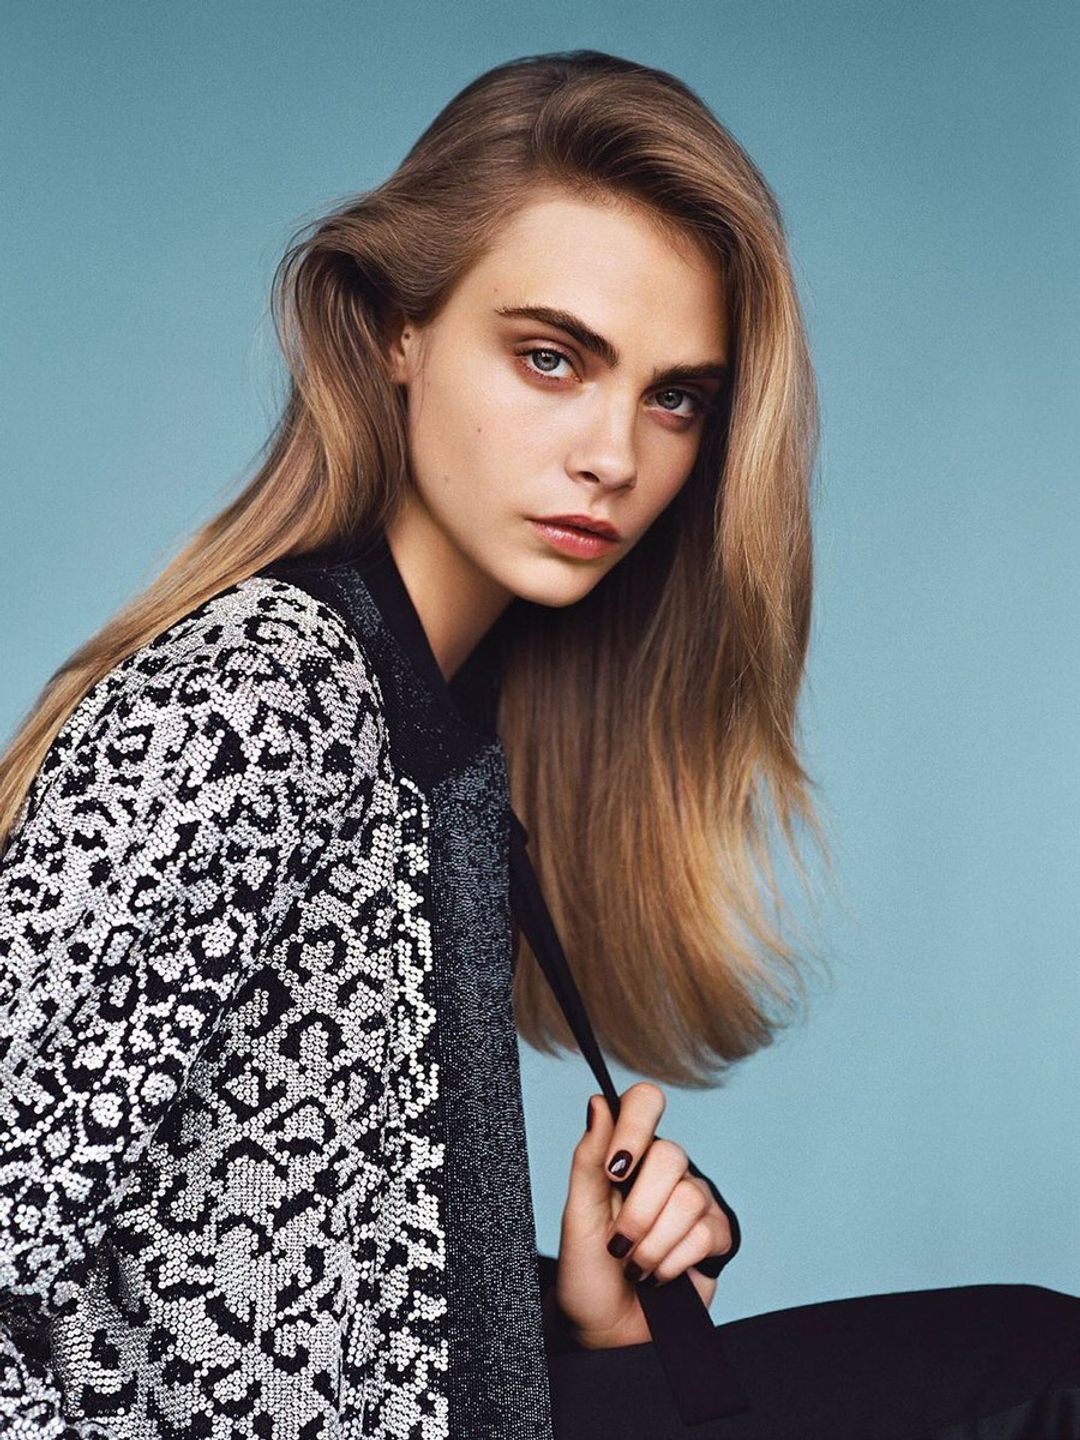 Cara Delevingne who is her father